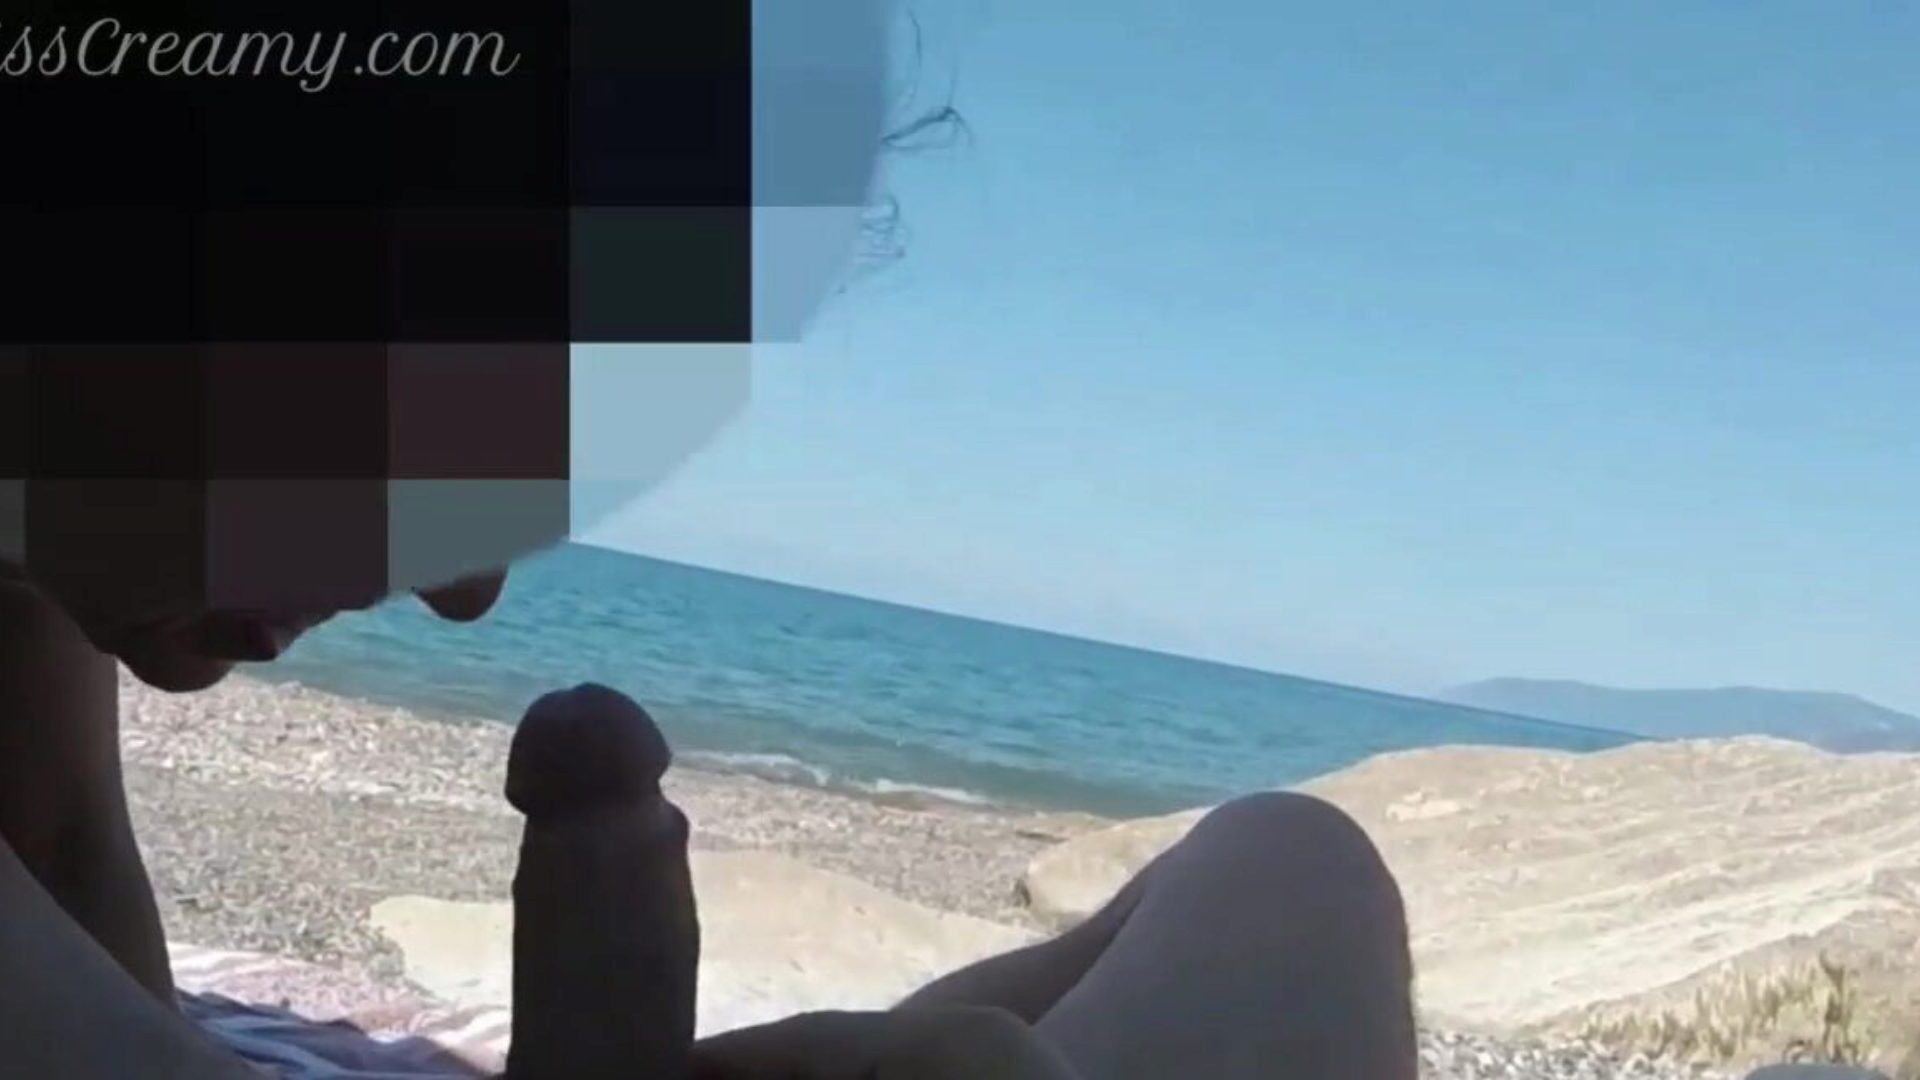 Girl fellates knob in public beach and receives caught by stranger - MissCreamy